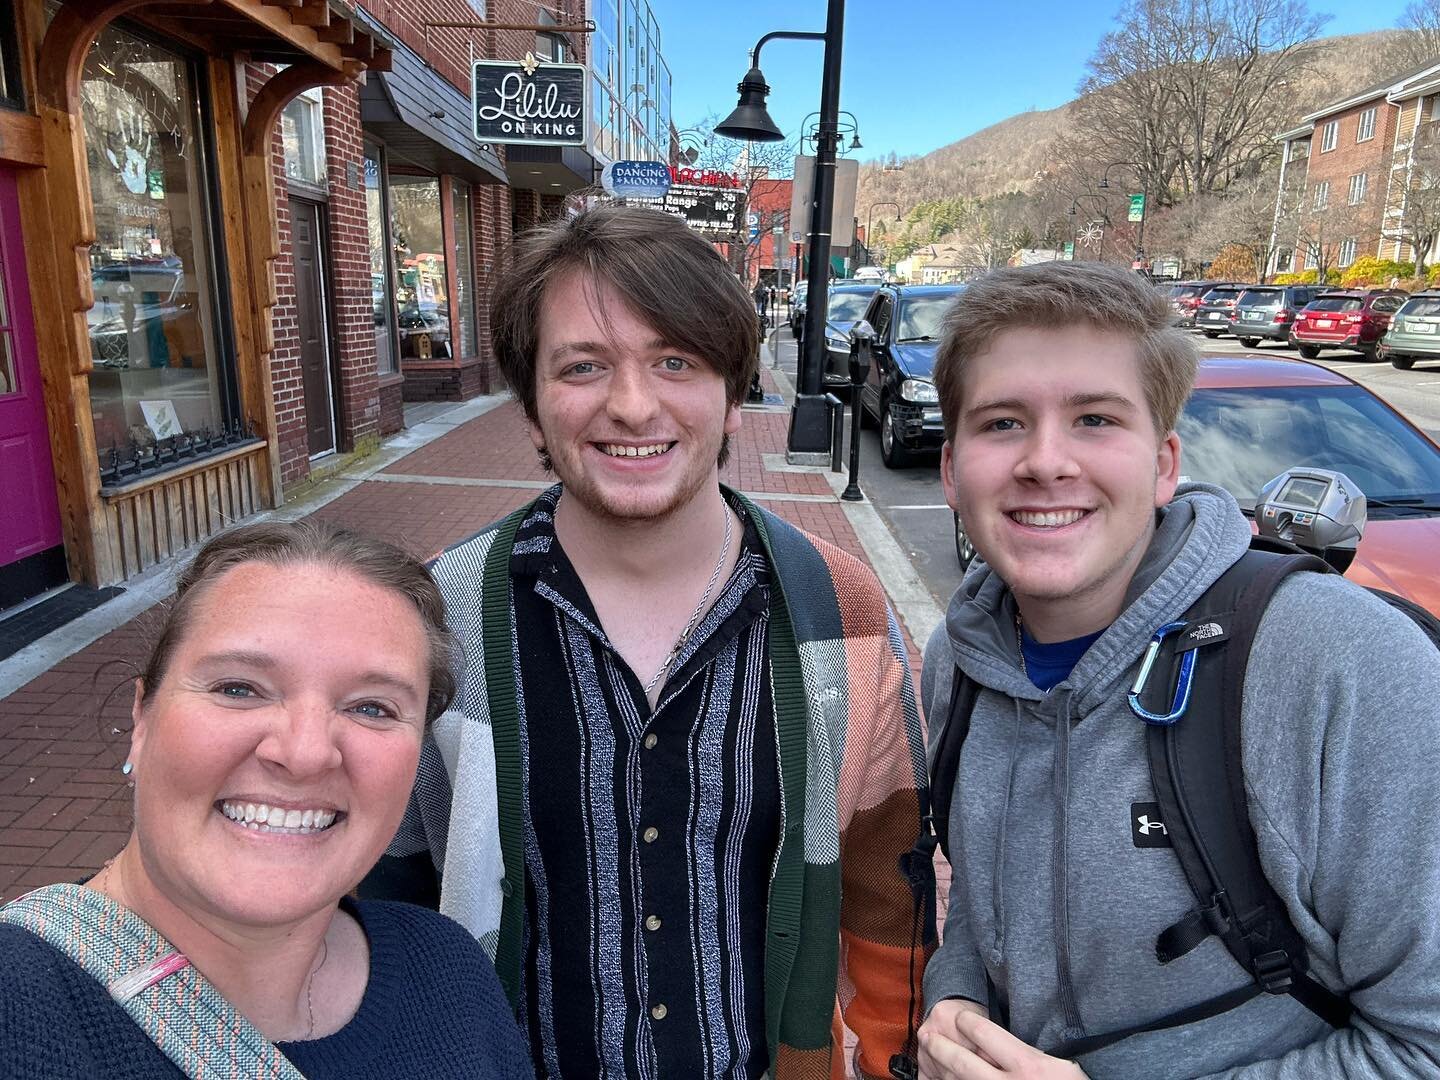 College road trip day #3 brought me back up the mountain to App State and I got to visit with three of the best! 😁. Oh the laughs!